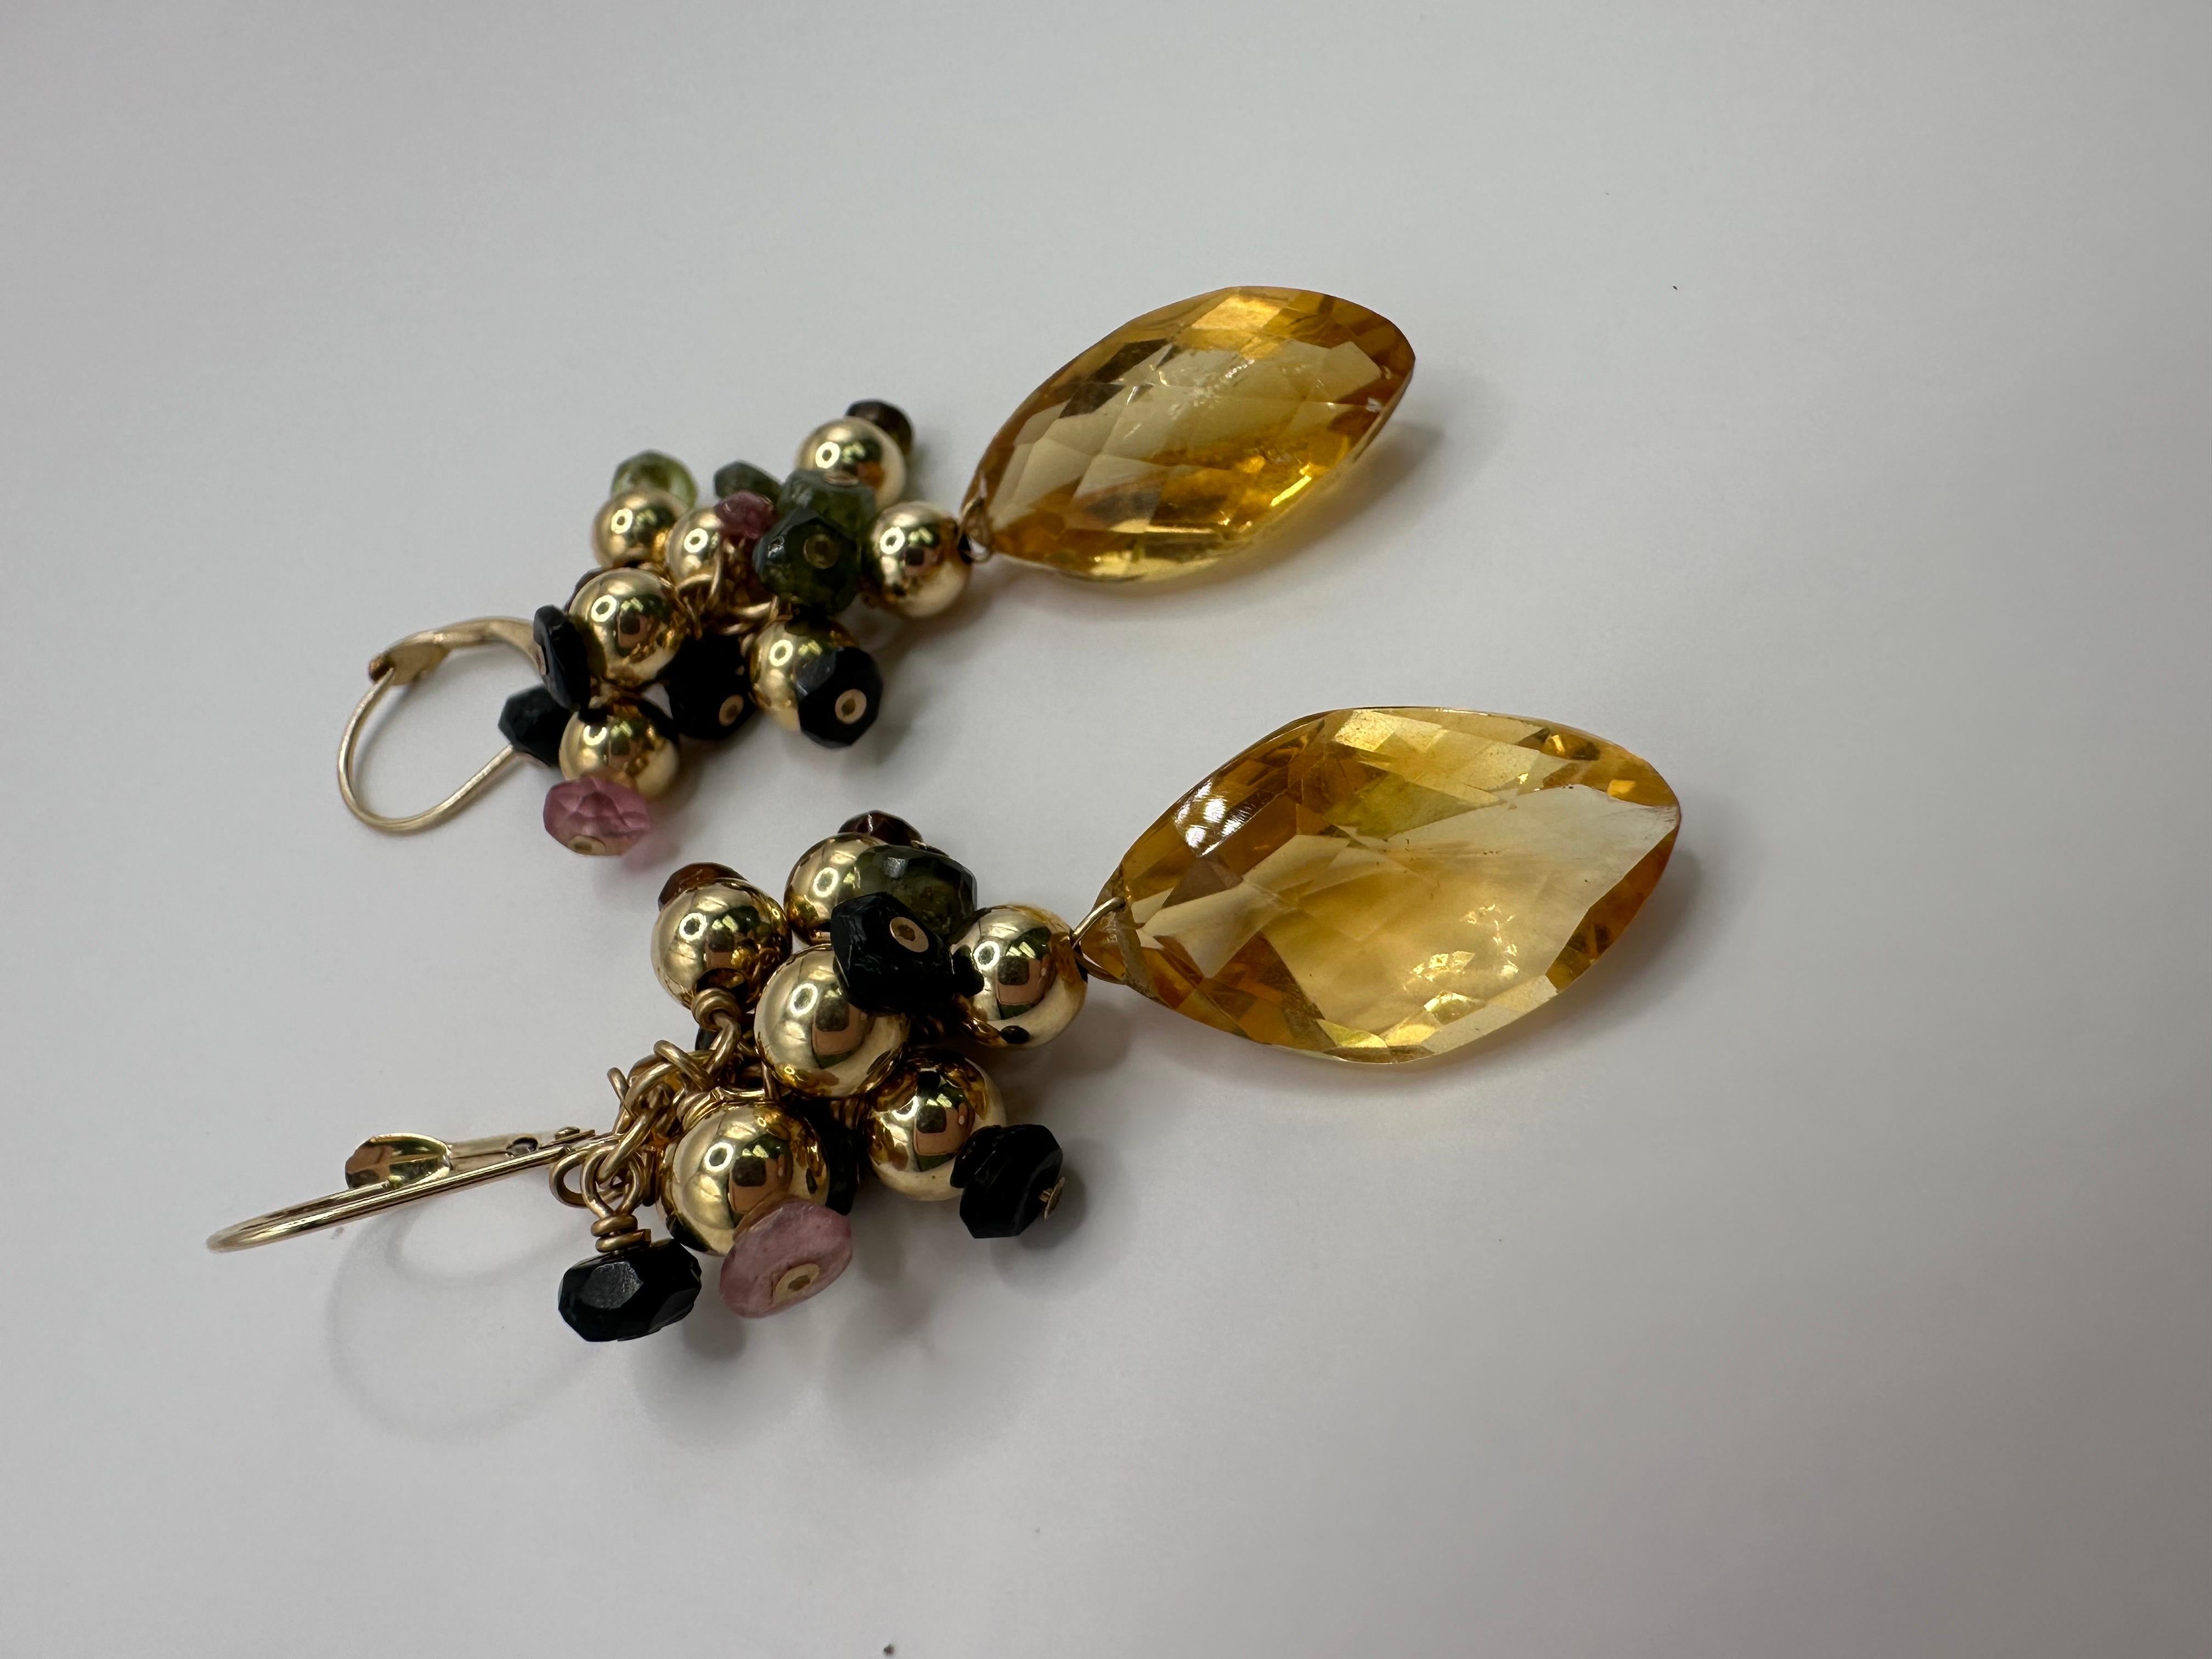 Cute dangling earrings with natural citrines and tourmalines in beautiful summer combo made in 14KT gold!

Metal Type: 14KT

Natural Gemstones(s): 
Color: Yellow,Pink, Green
Cut:Round Briolette, Fancy shape 
Clarity: Slightly Included  

Certificate